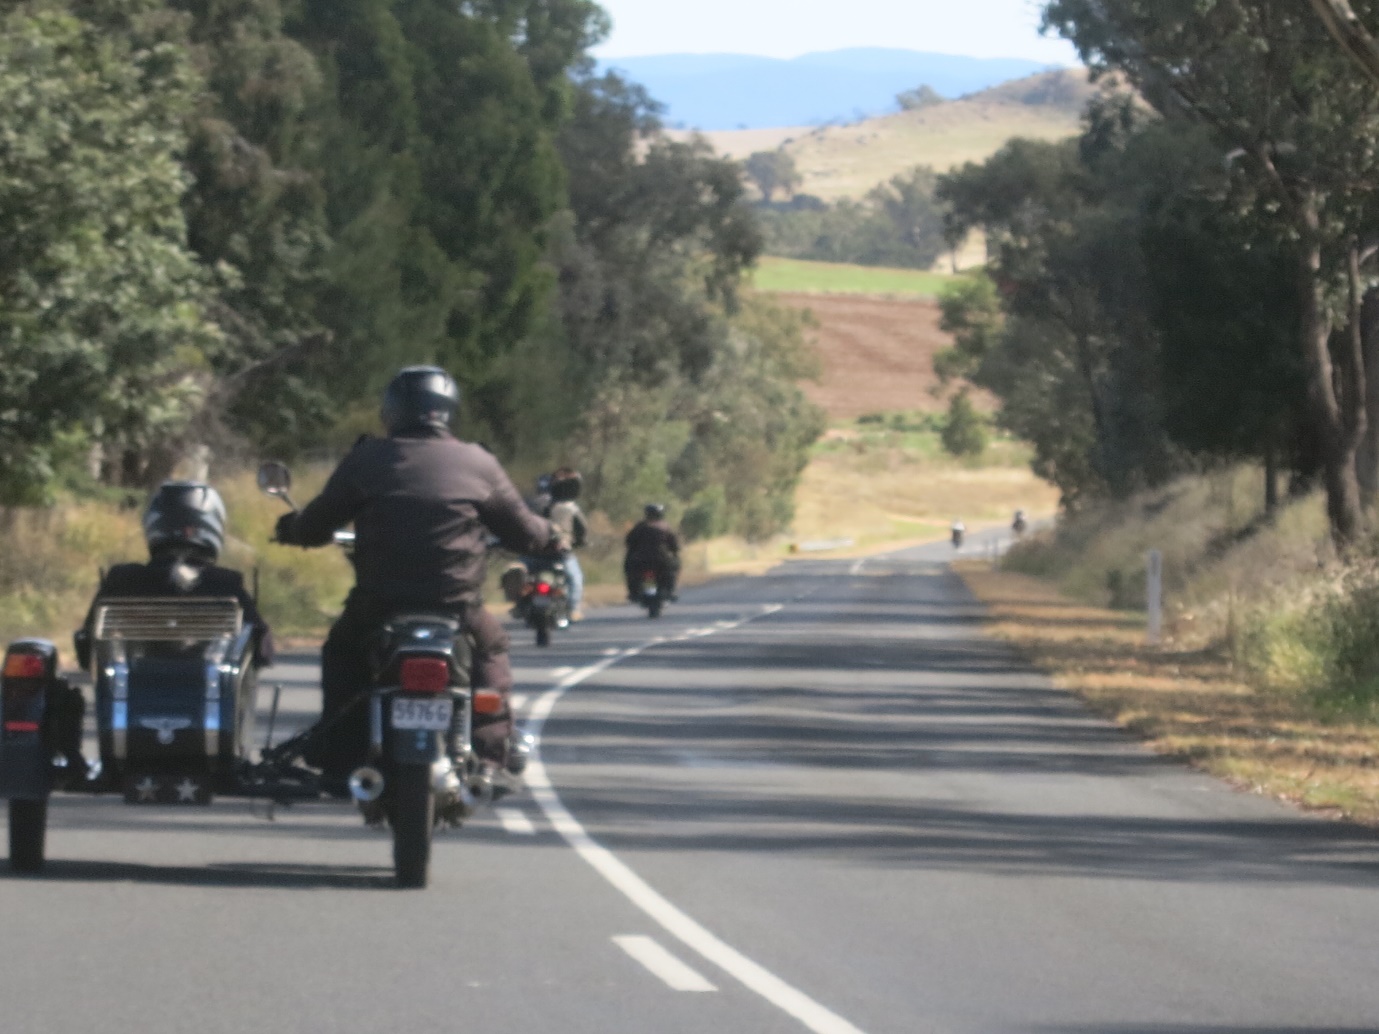 A group of people riding motorcycles down a road

Description automatically generated with medium confidence